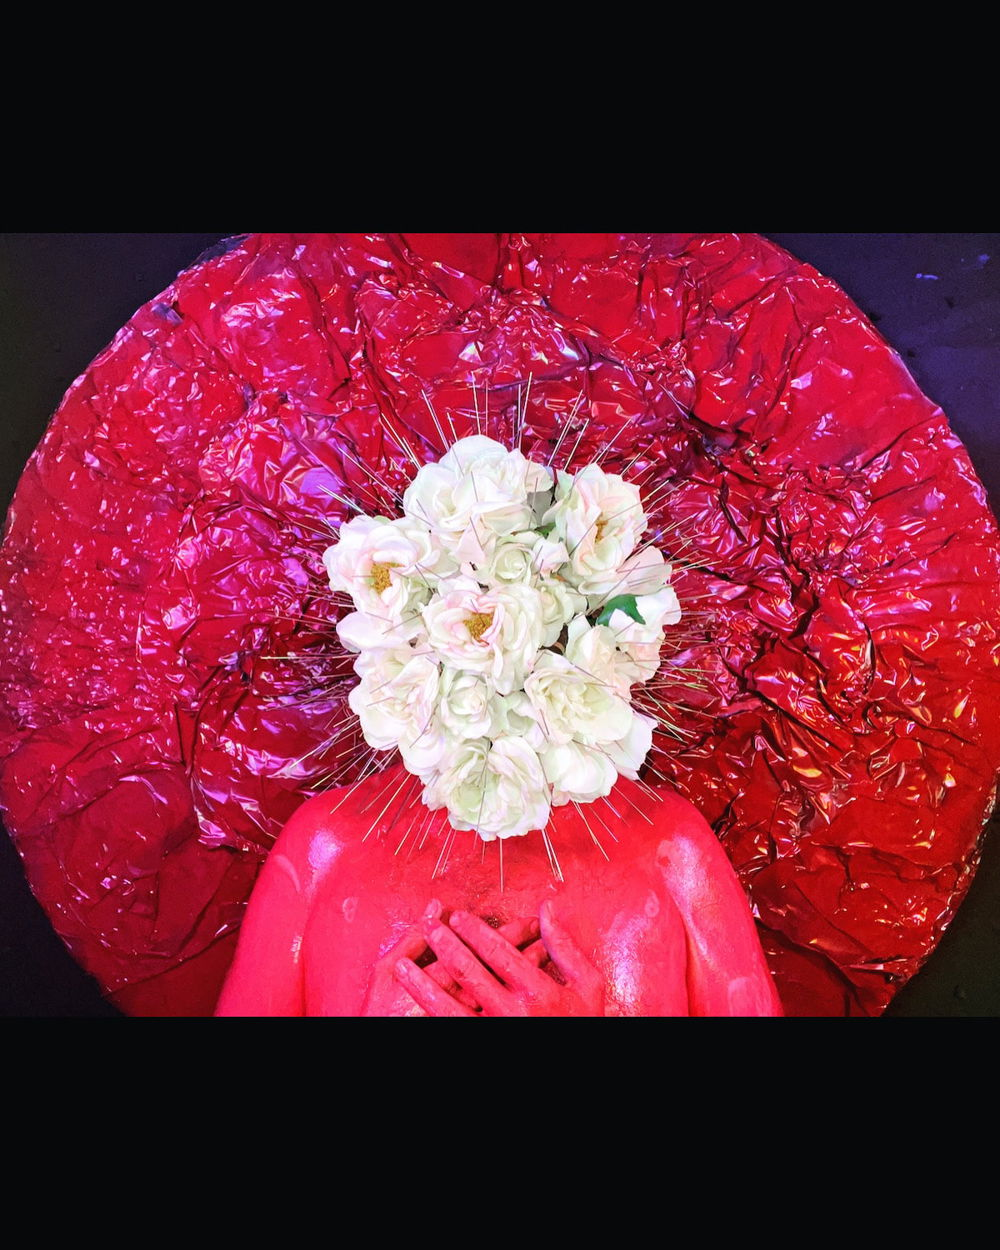 A portrait of a person, painted bubblegum pink, their face obscured by a burst of white flowers. The figure is placed in front of a magenta circle, creating the illusion of a halo and clasps their hands gently at their chest.